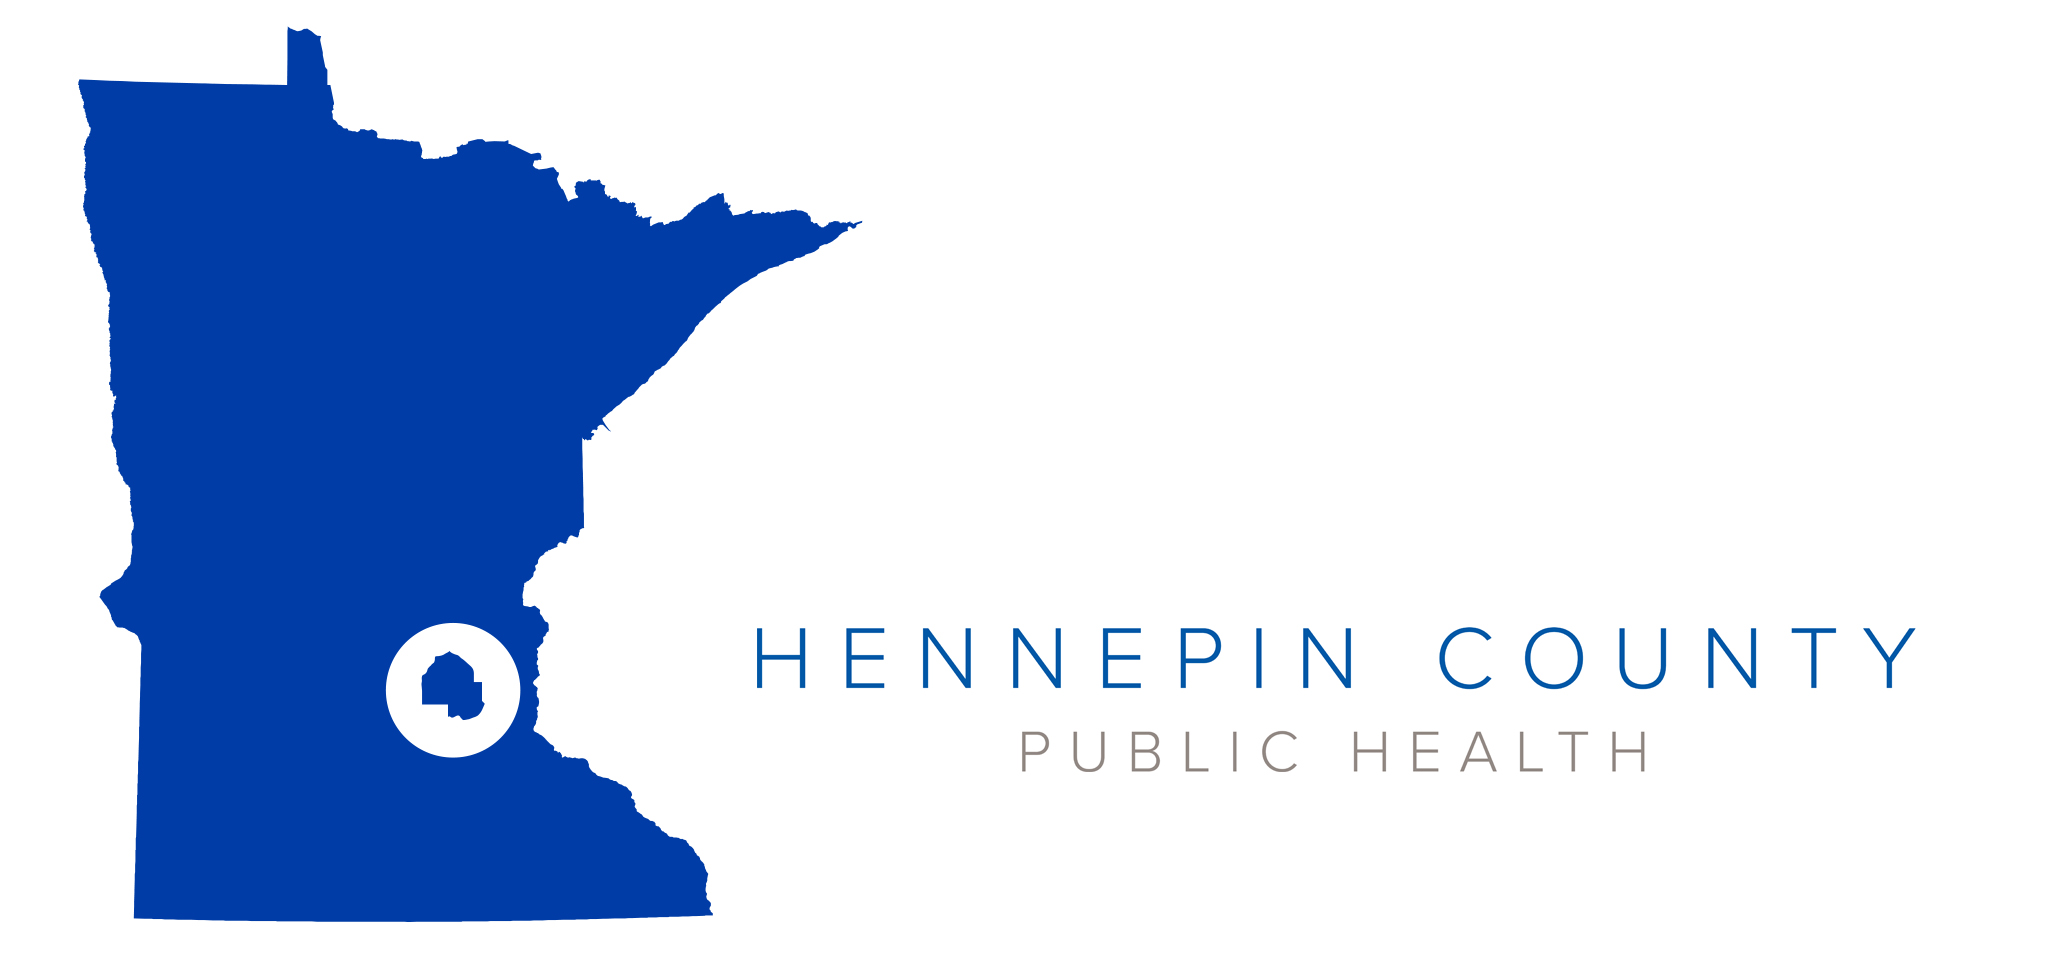 Hennepin County shown within image of Minnesota